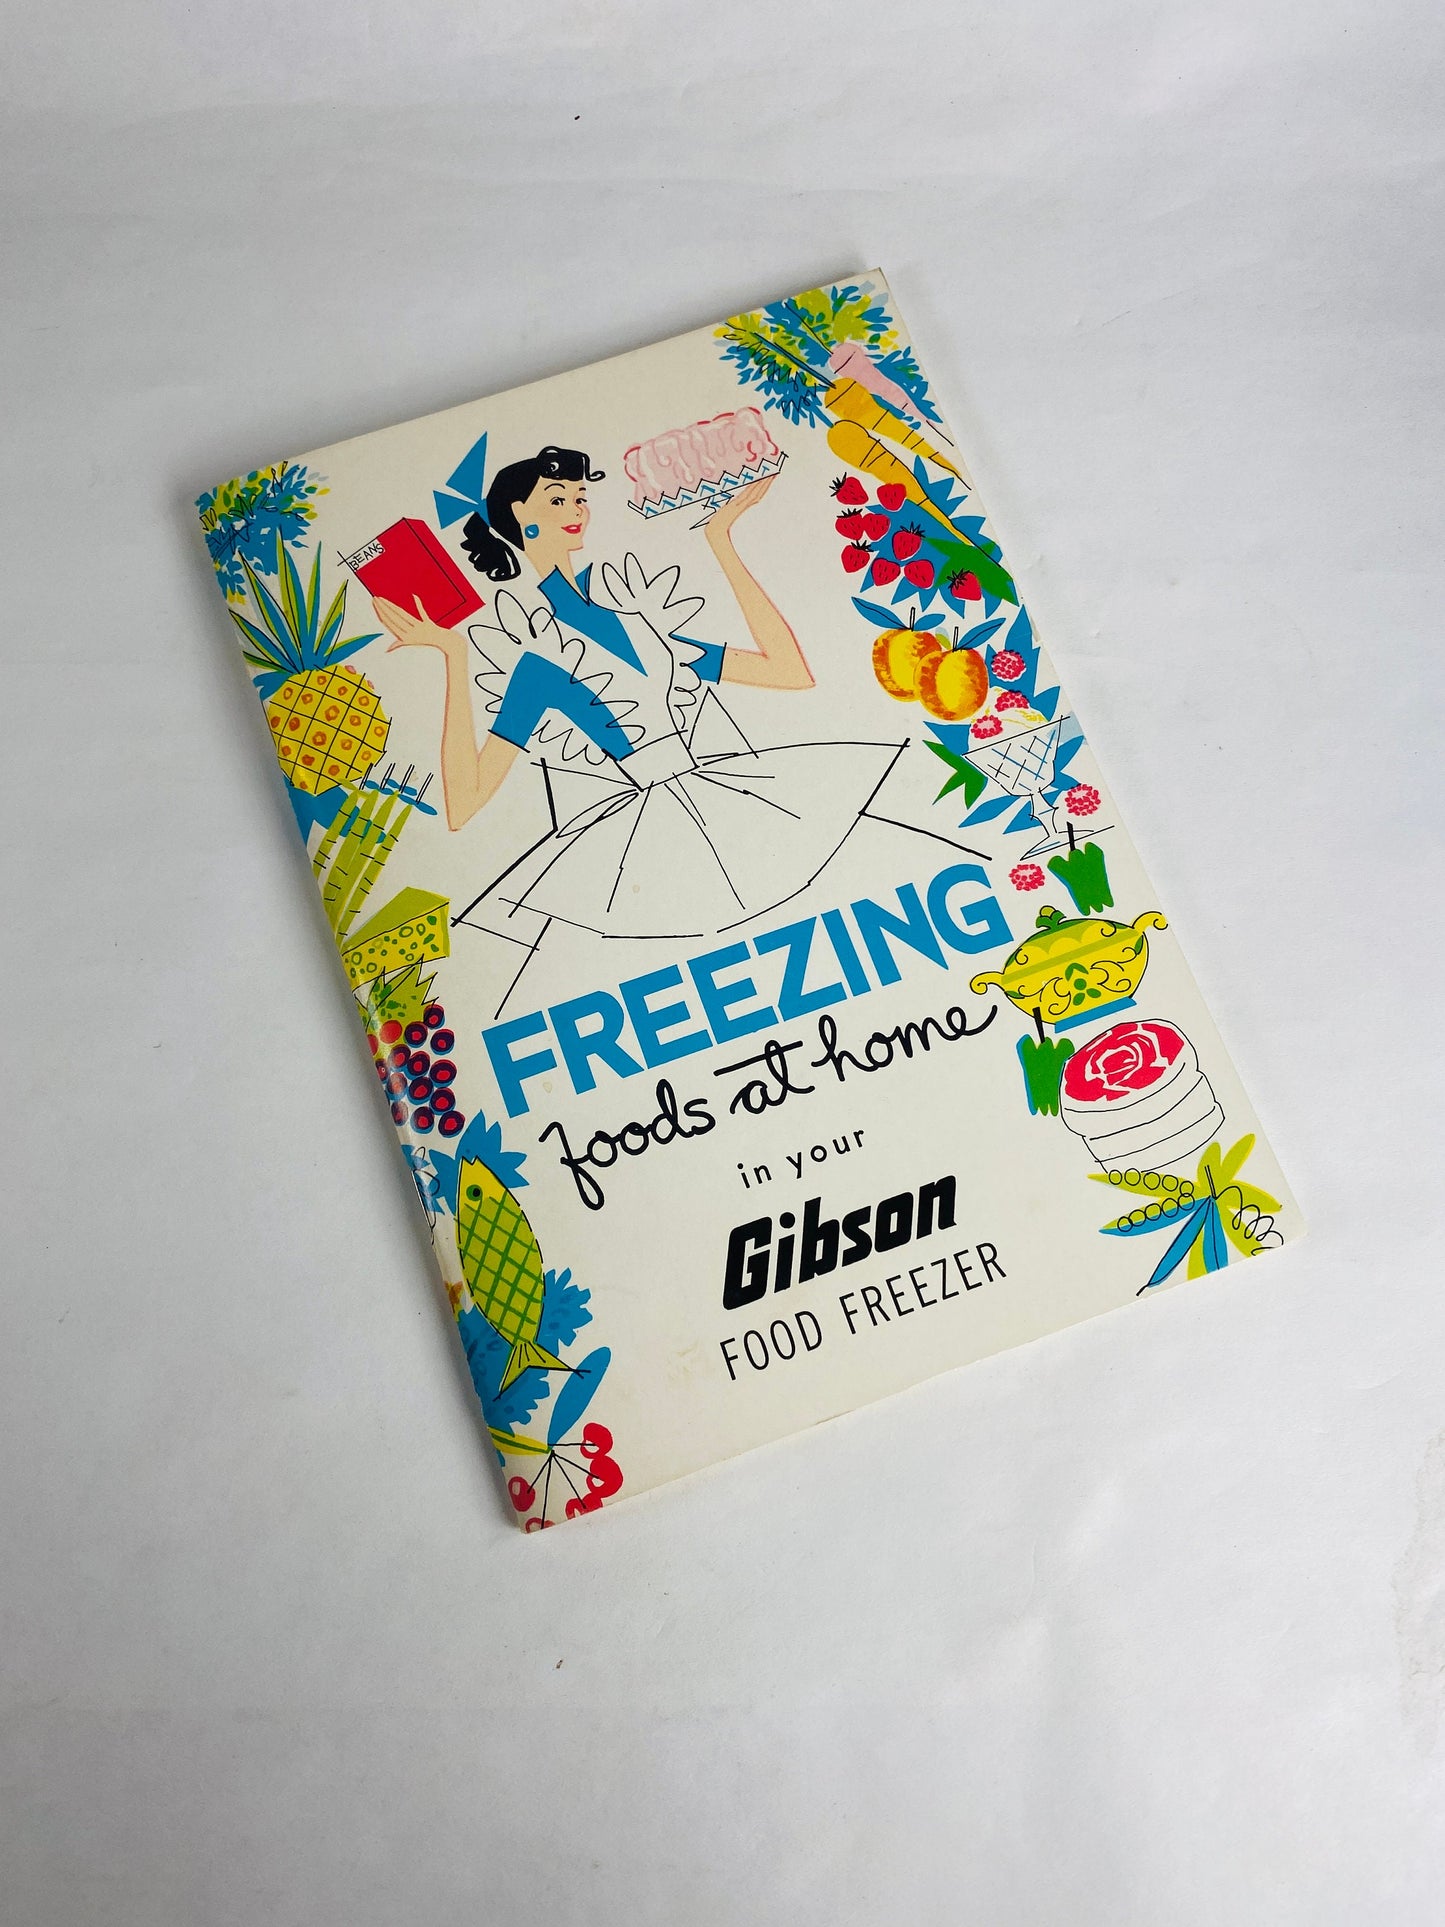 1959 Freezing Foods at Home in your Gibson Freezer vintage Owners Manual Retro kitchen collectible